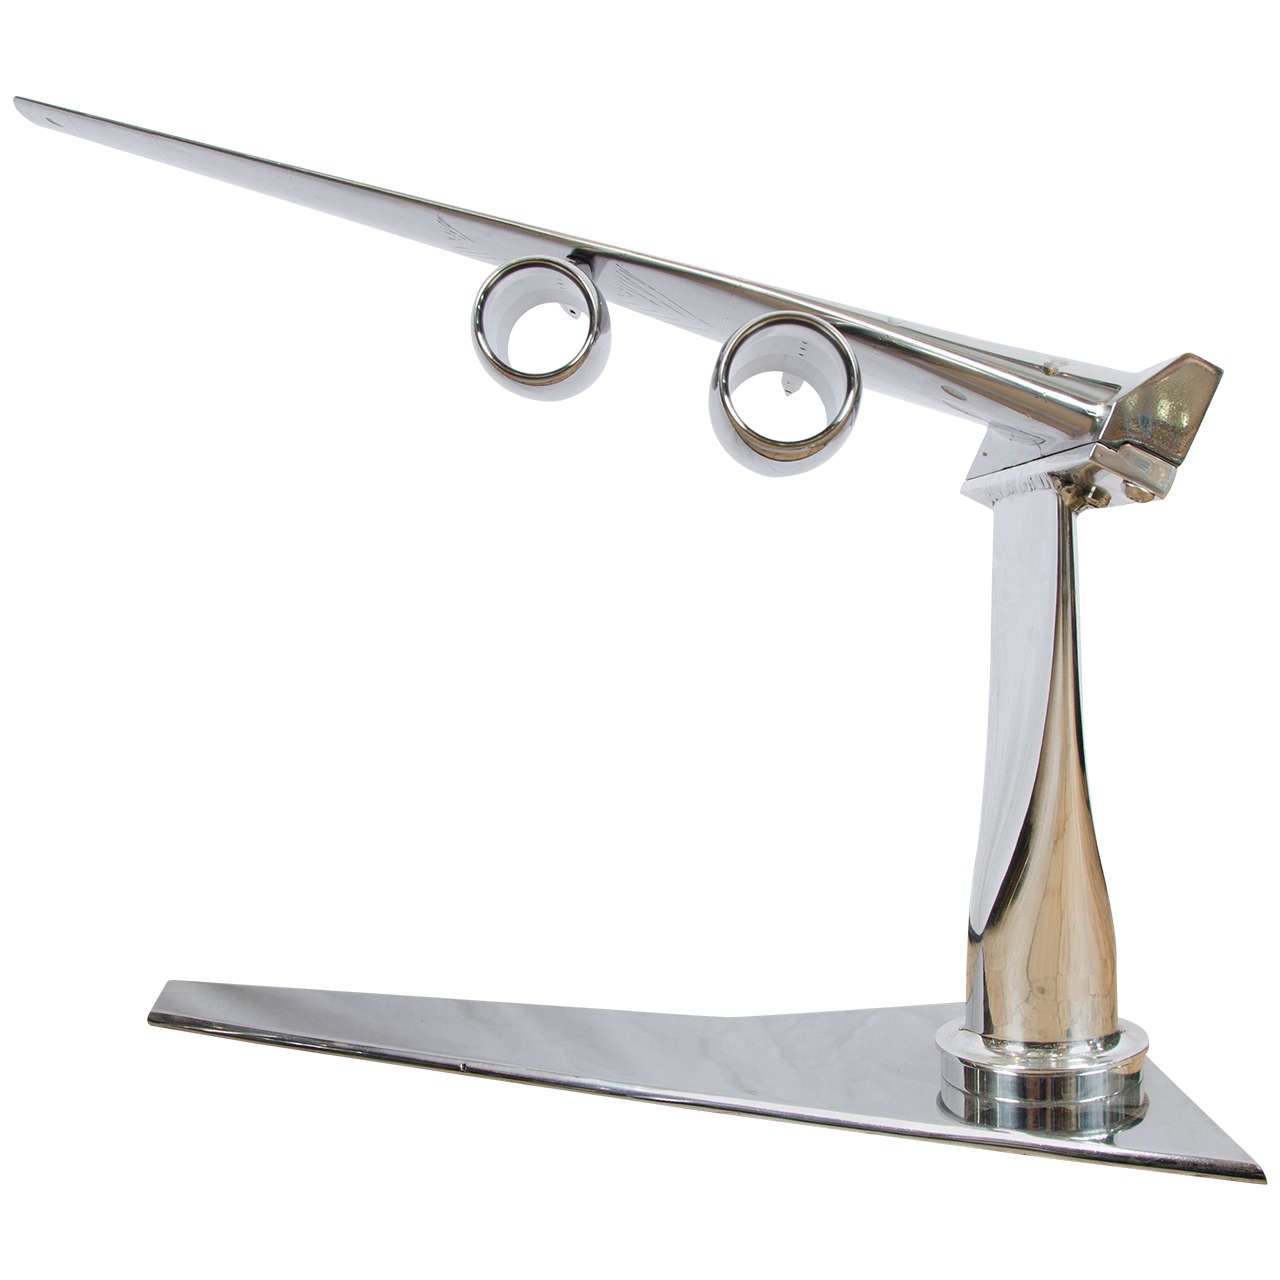 Aircraft Wing Wind Tunnel Model